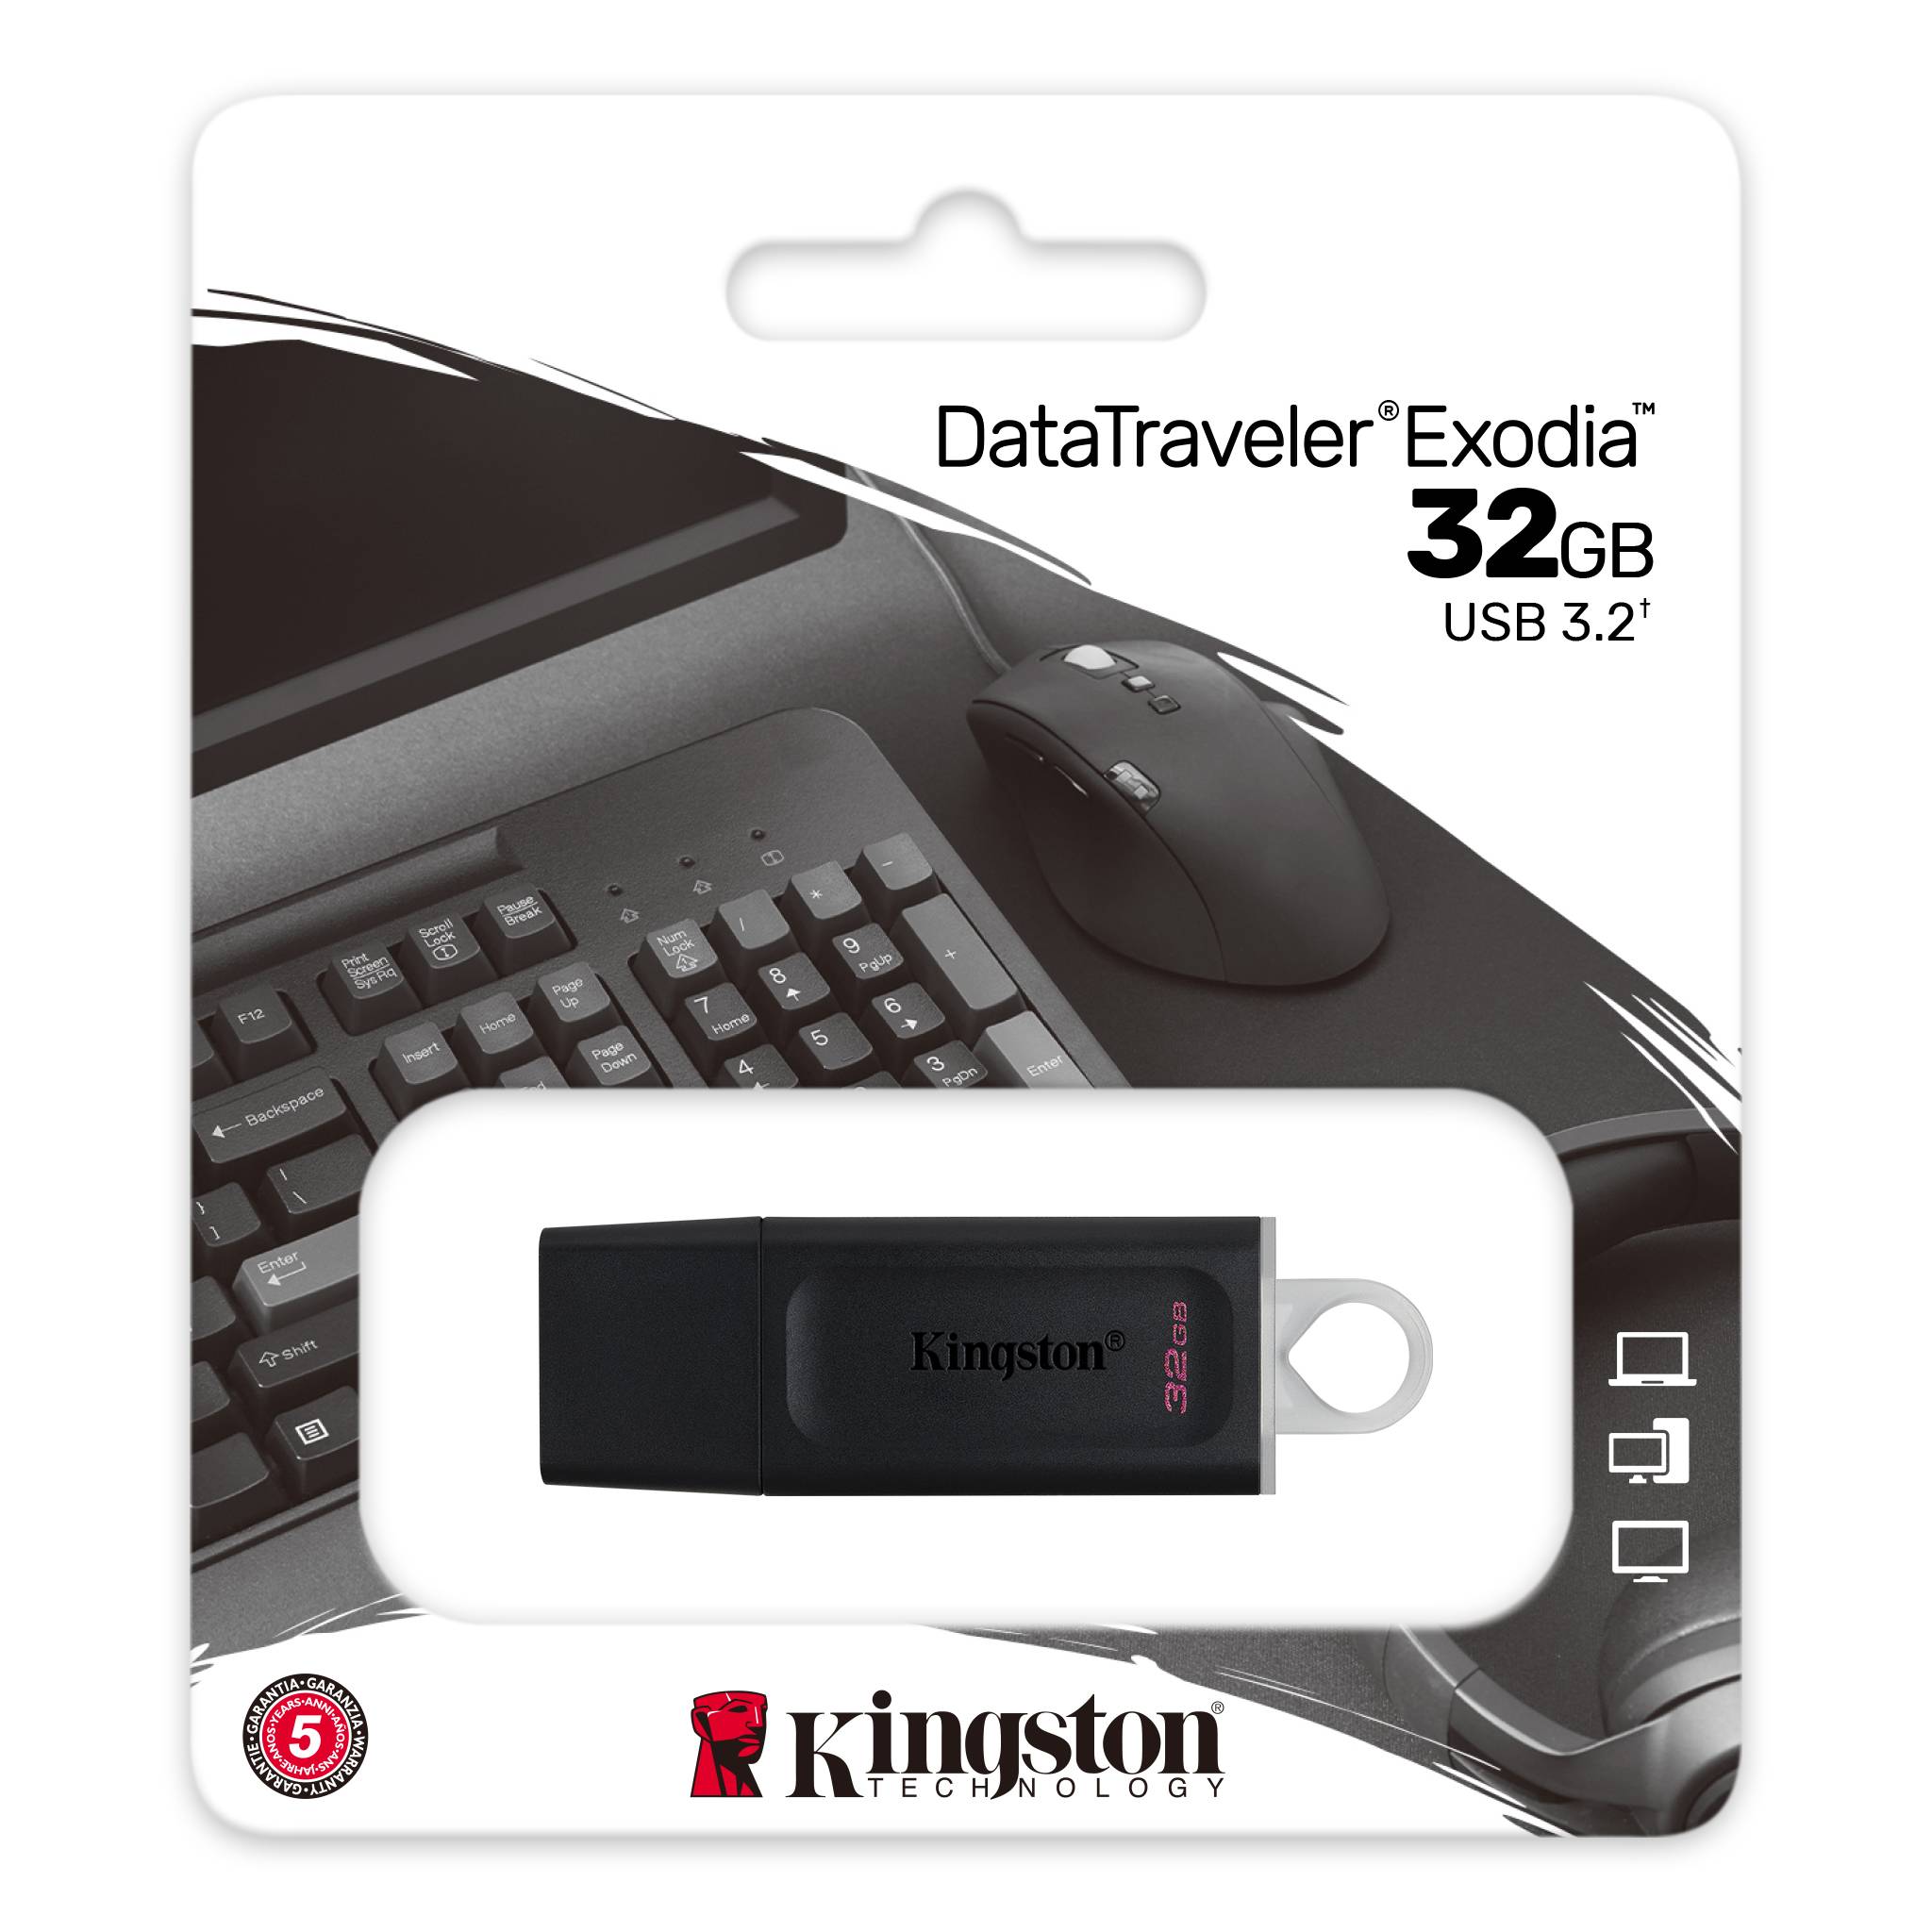 Kingston DataTraveler Exodia USB3.2 32GB Flash Drive - I Gaming Computer | Australia Wide Shipping | Buy now, Pay Later with Afterpay, Klarna, Zip, Latitude & Paypal